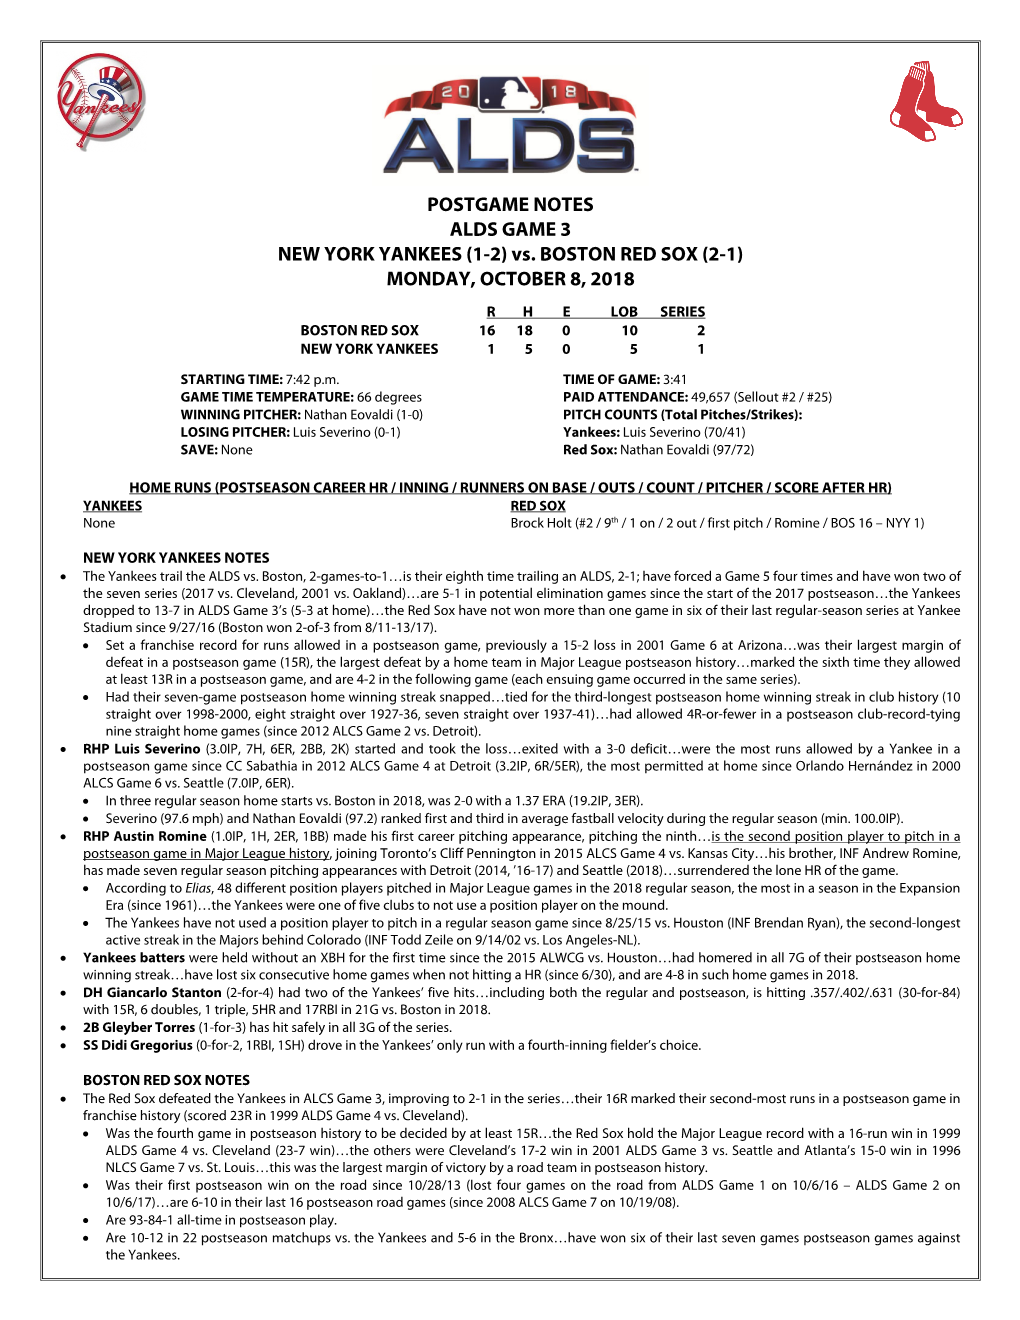 Postgame Notes Alds Game 3 New York